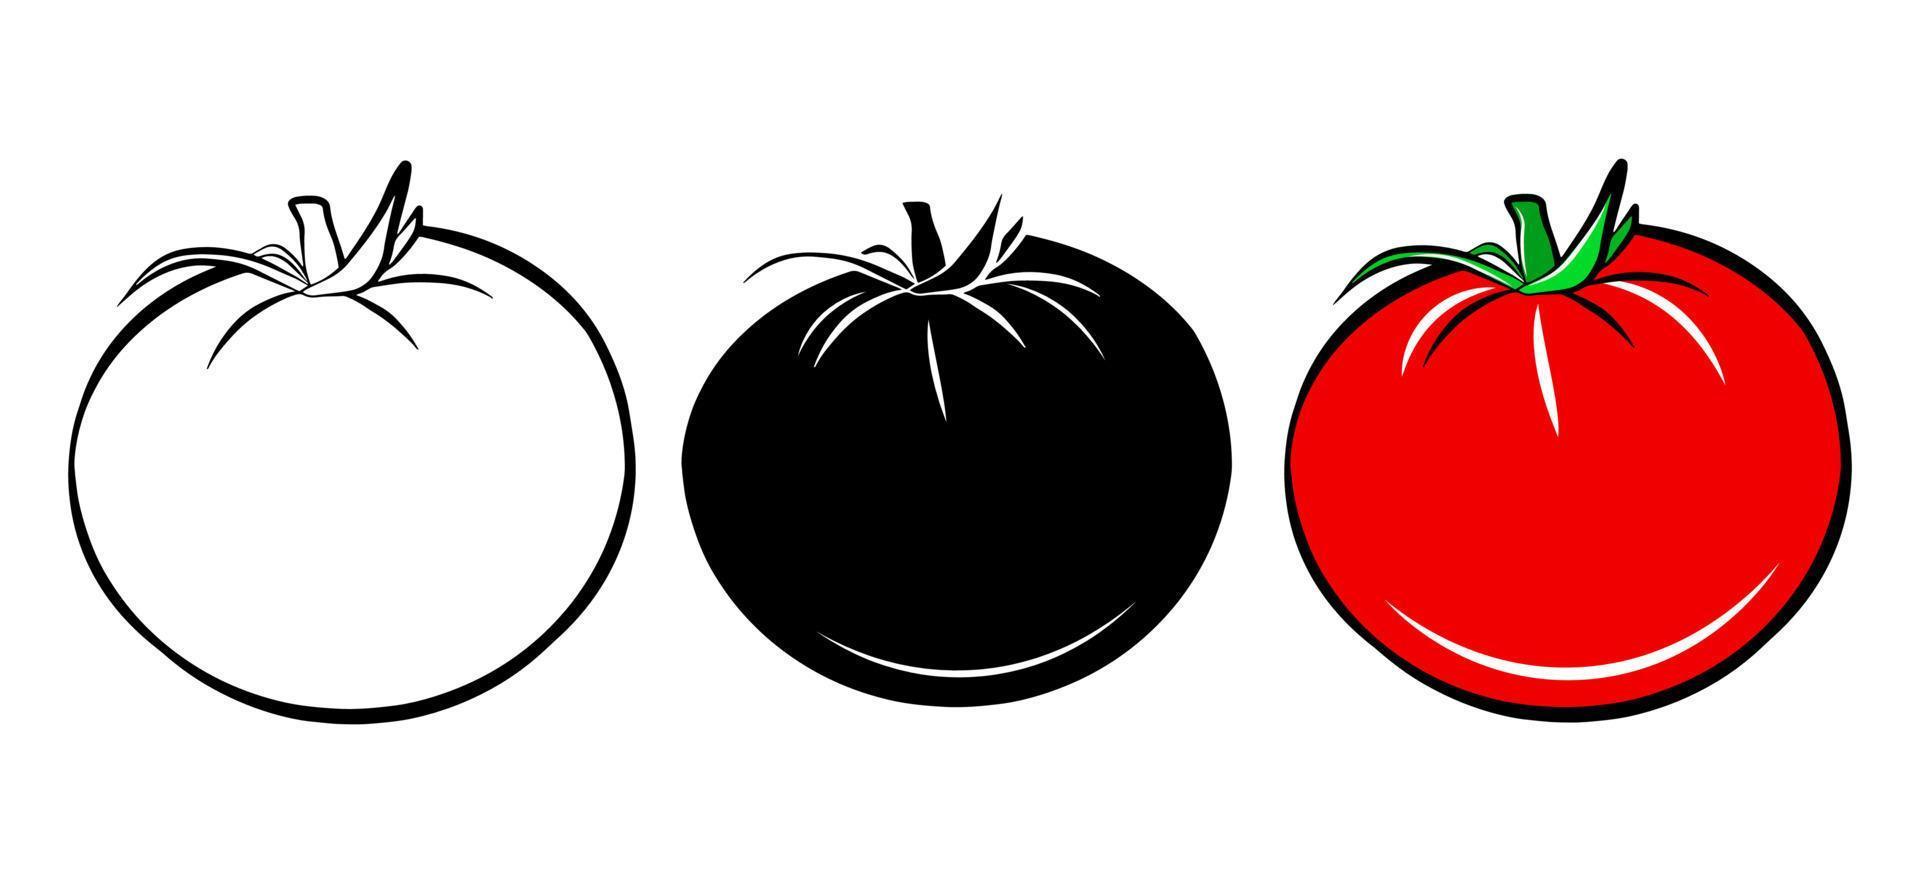 Red tomato isolated vector icon. Vegetable fresh food cartoon outline sketch set. Package logo design element. Farm natural healthy food. Vegan organic plant. Simple emblem template. Graphic symbol.